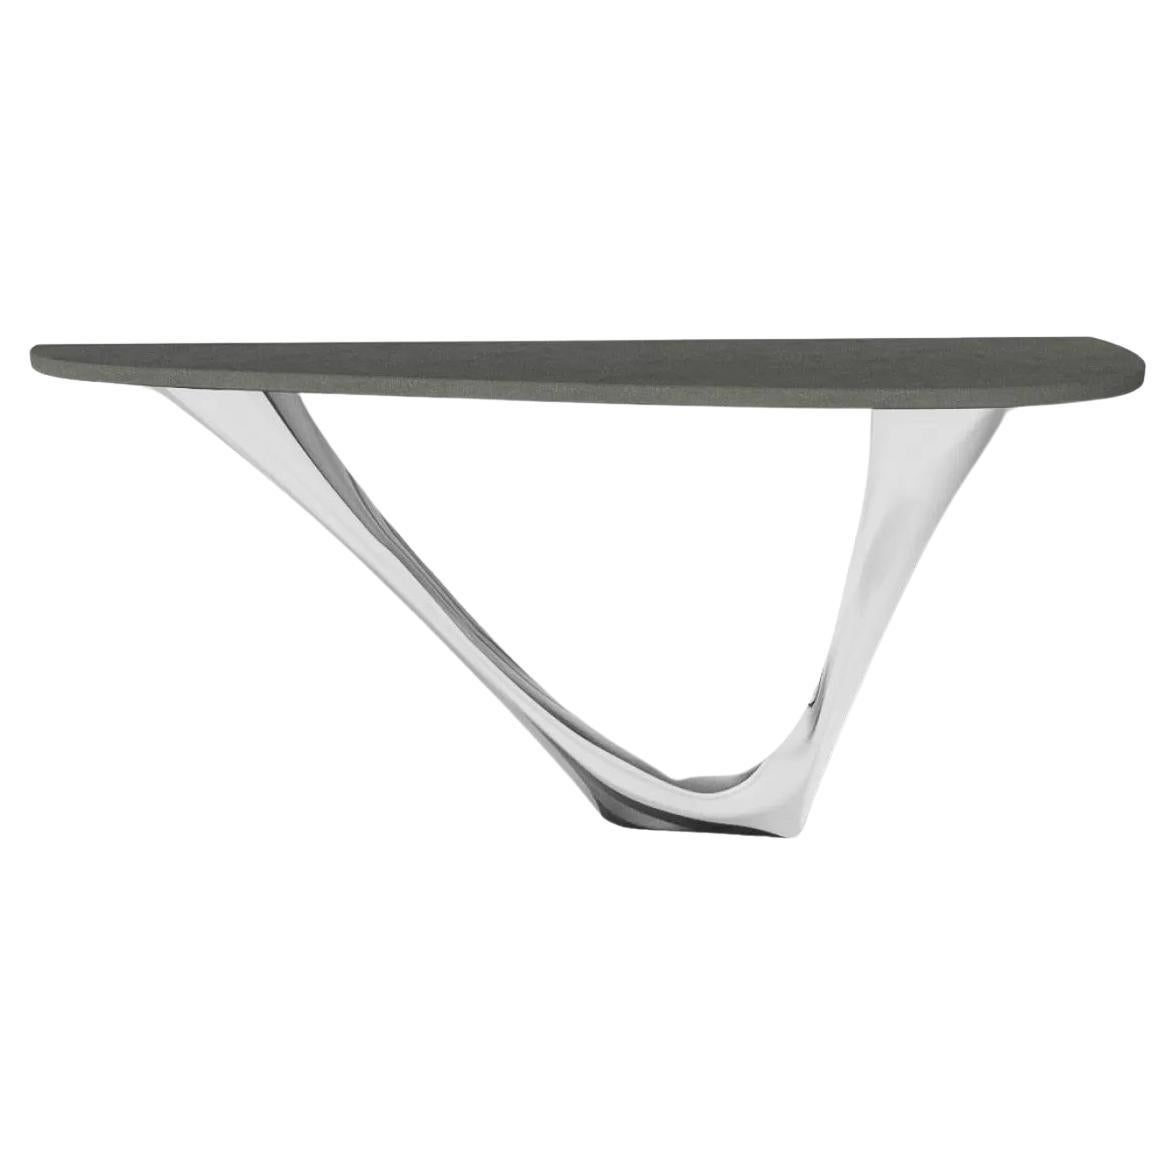 G-Console Mono with Concrete Top Base Inox Polished by Zieta For Sale